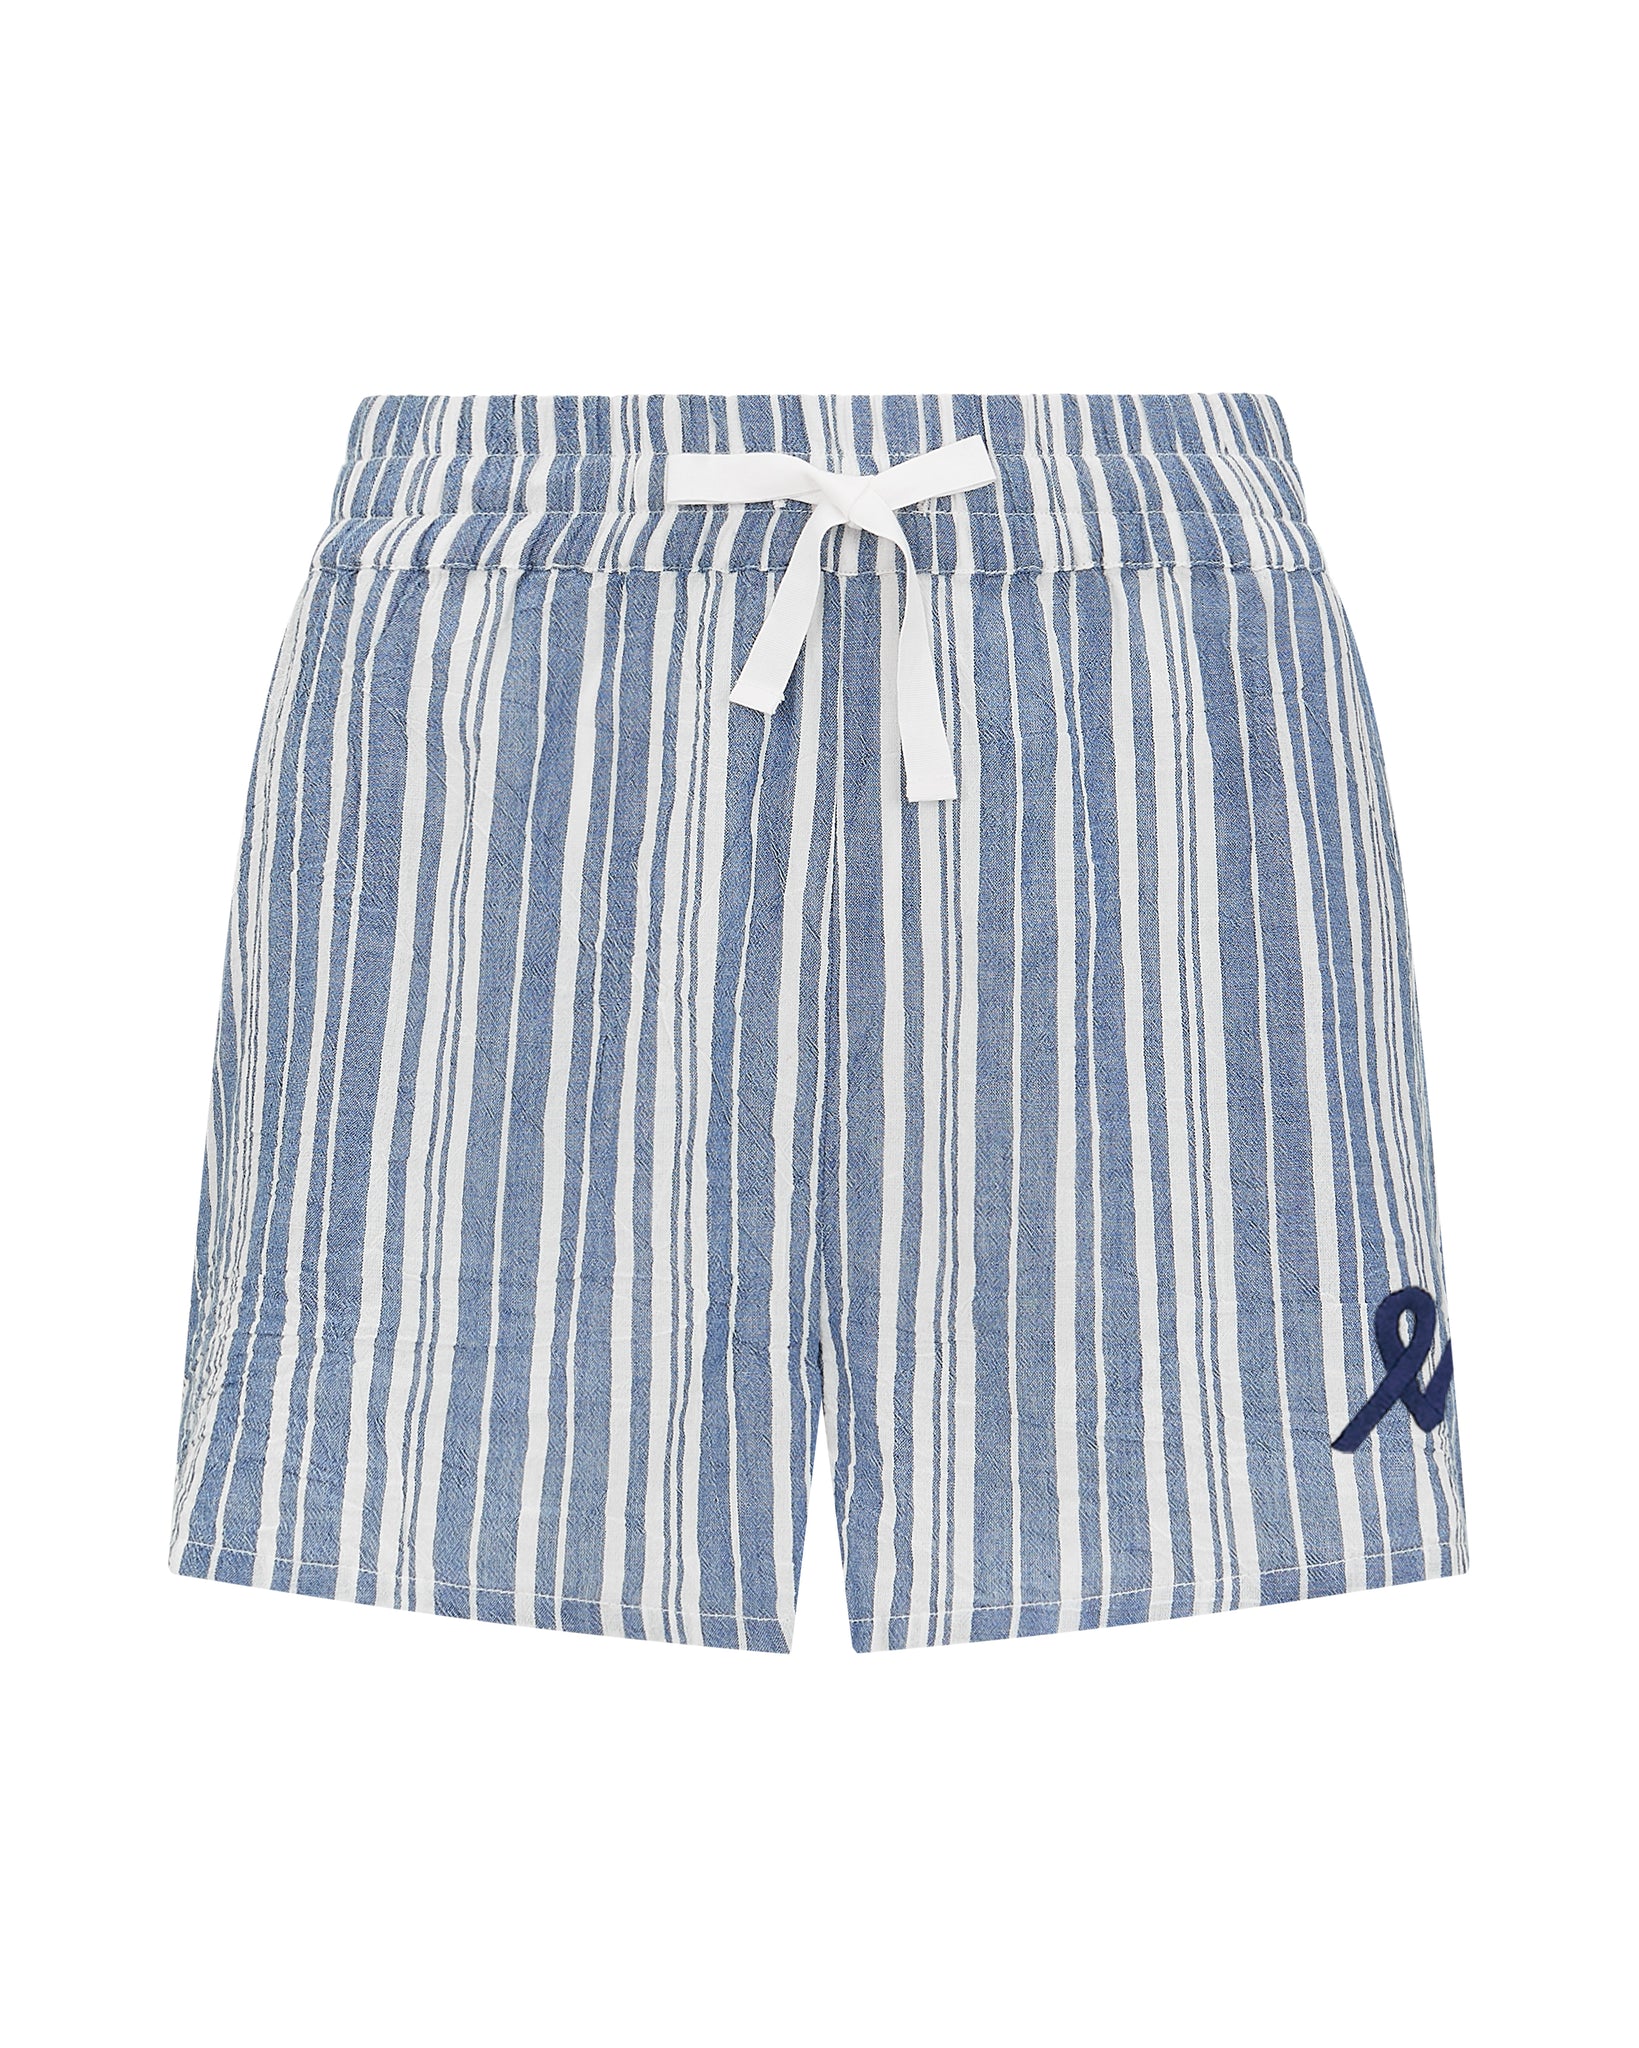 The Classic Boxer - French Navy Stripe